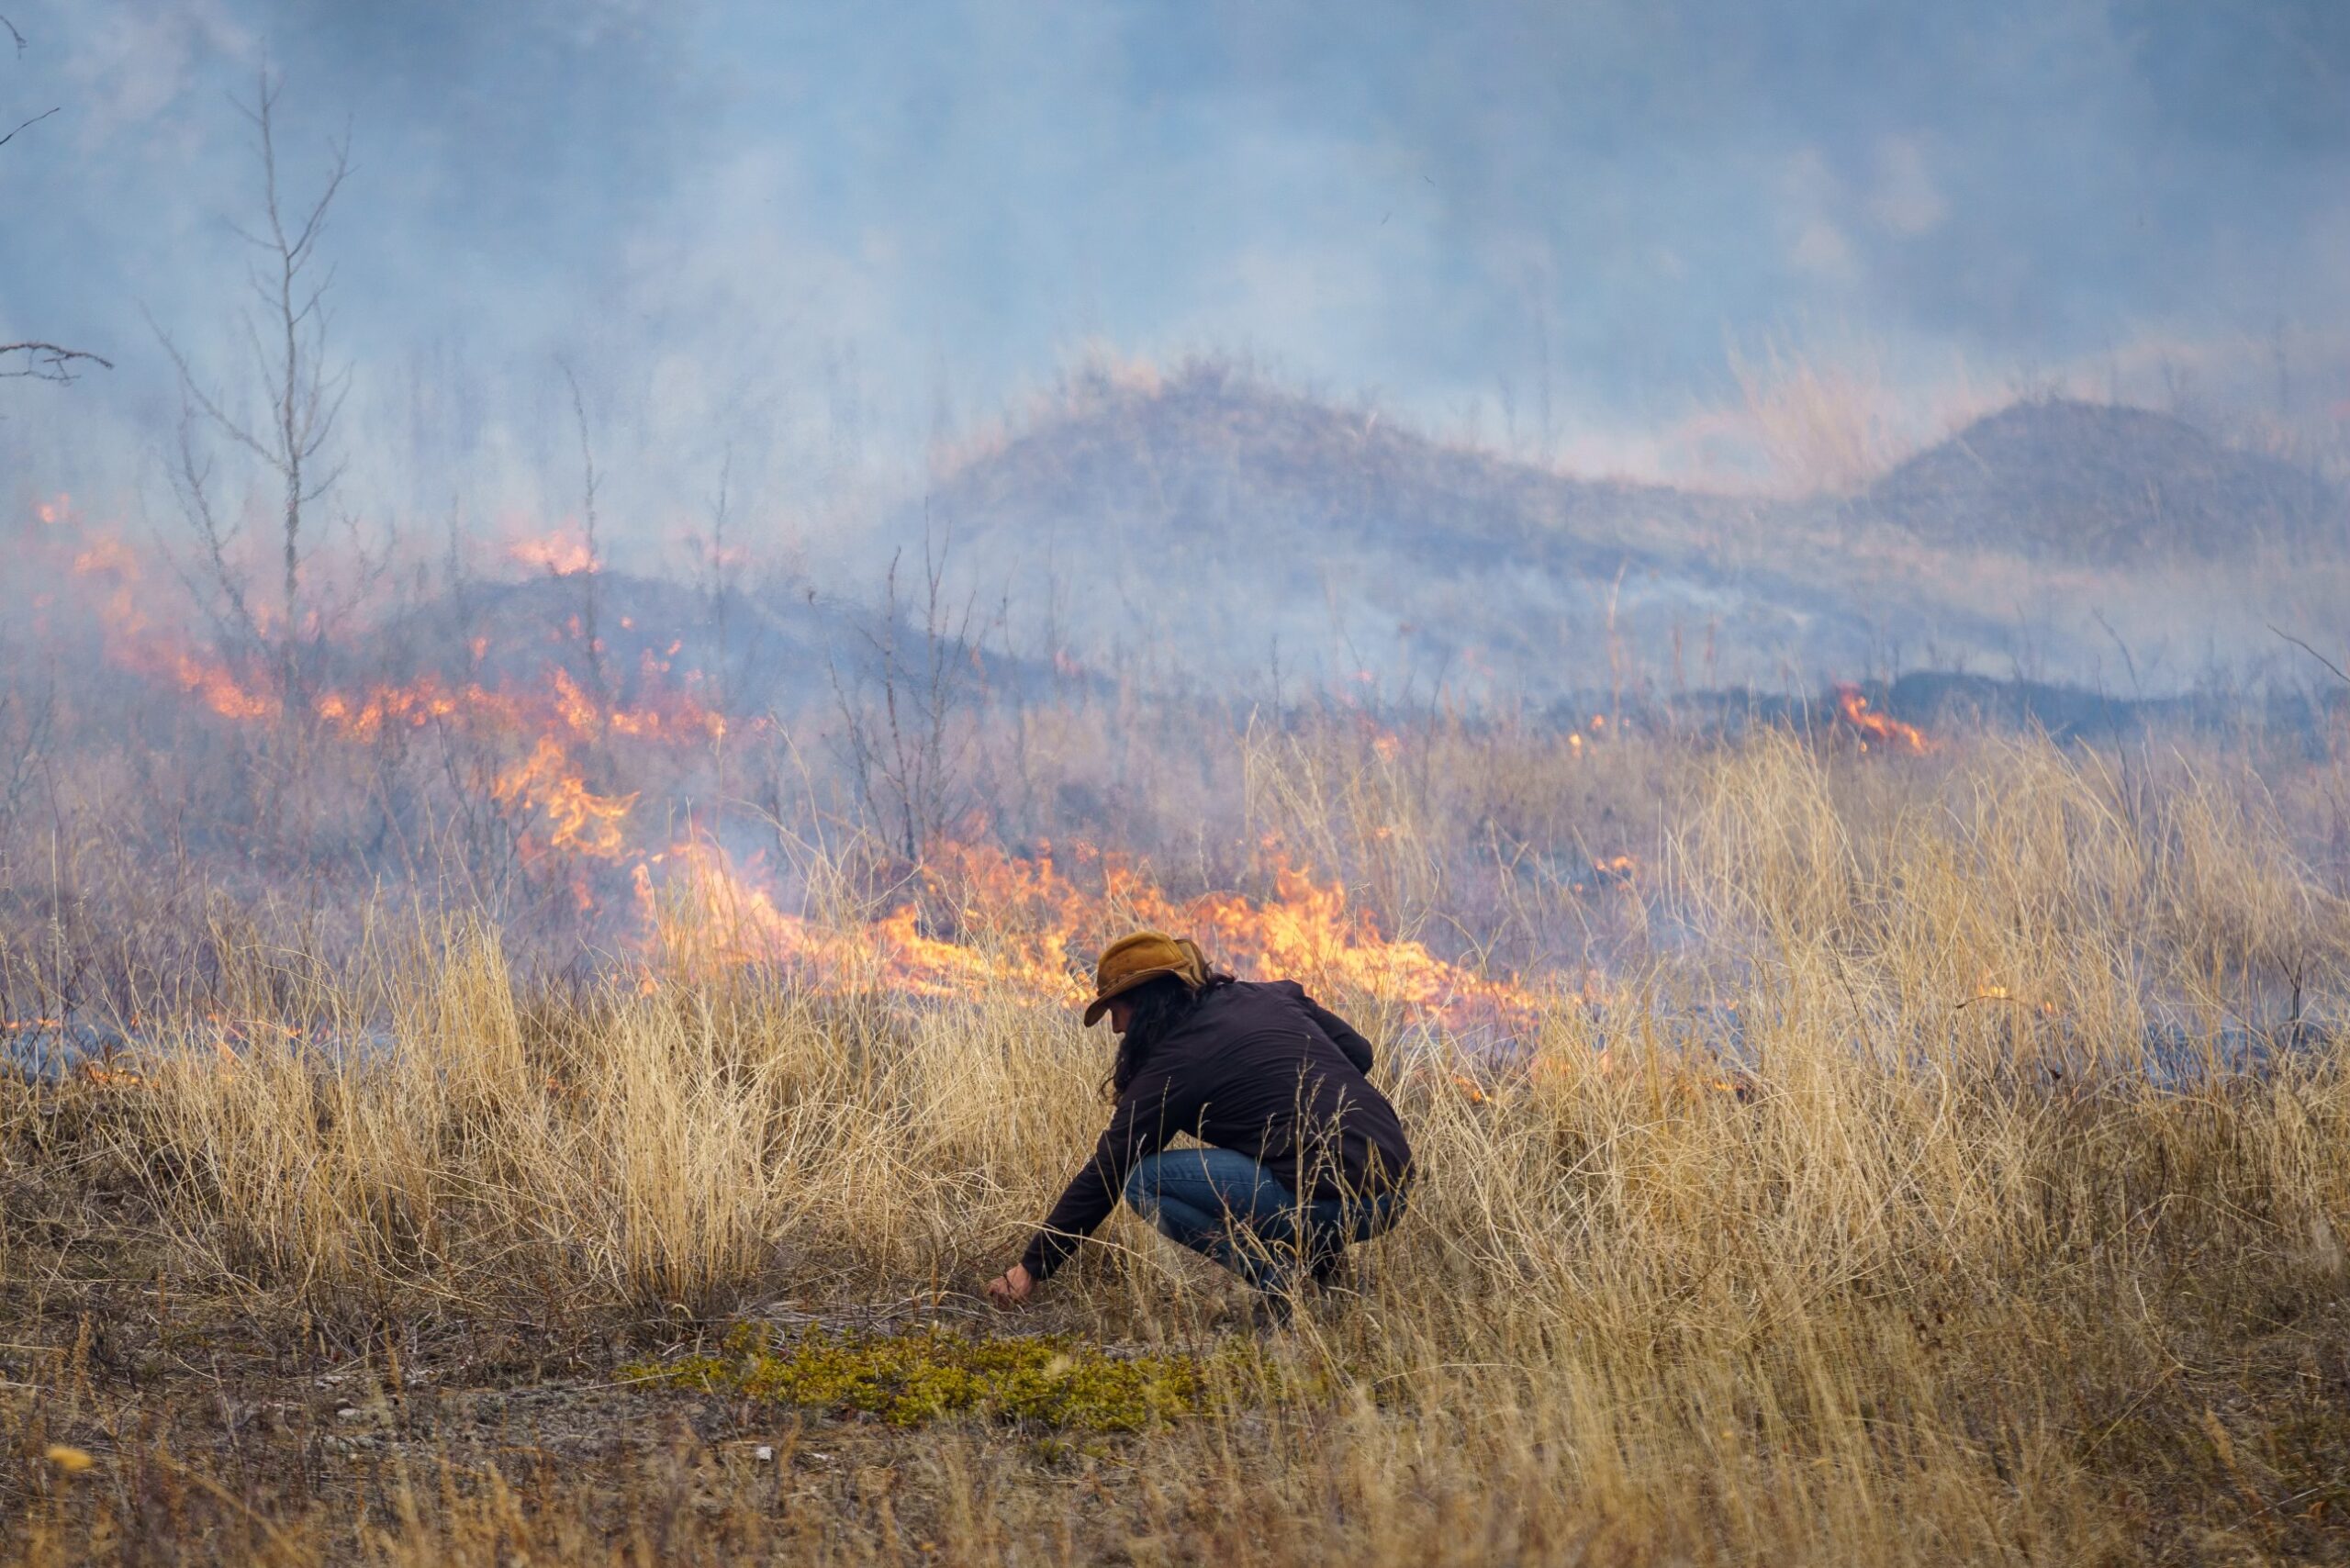 A person with their back to the camera crouches in a field near a perscribed, traditional fire.